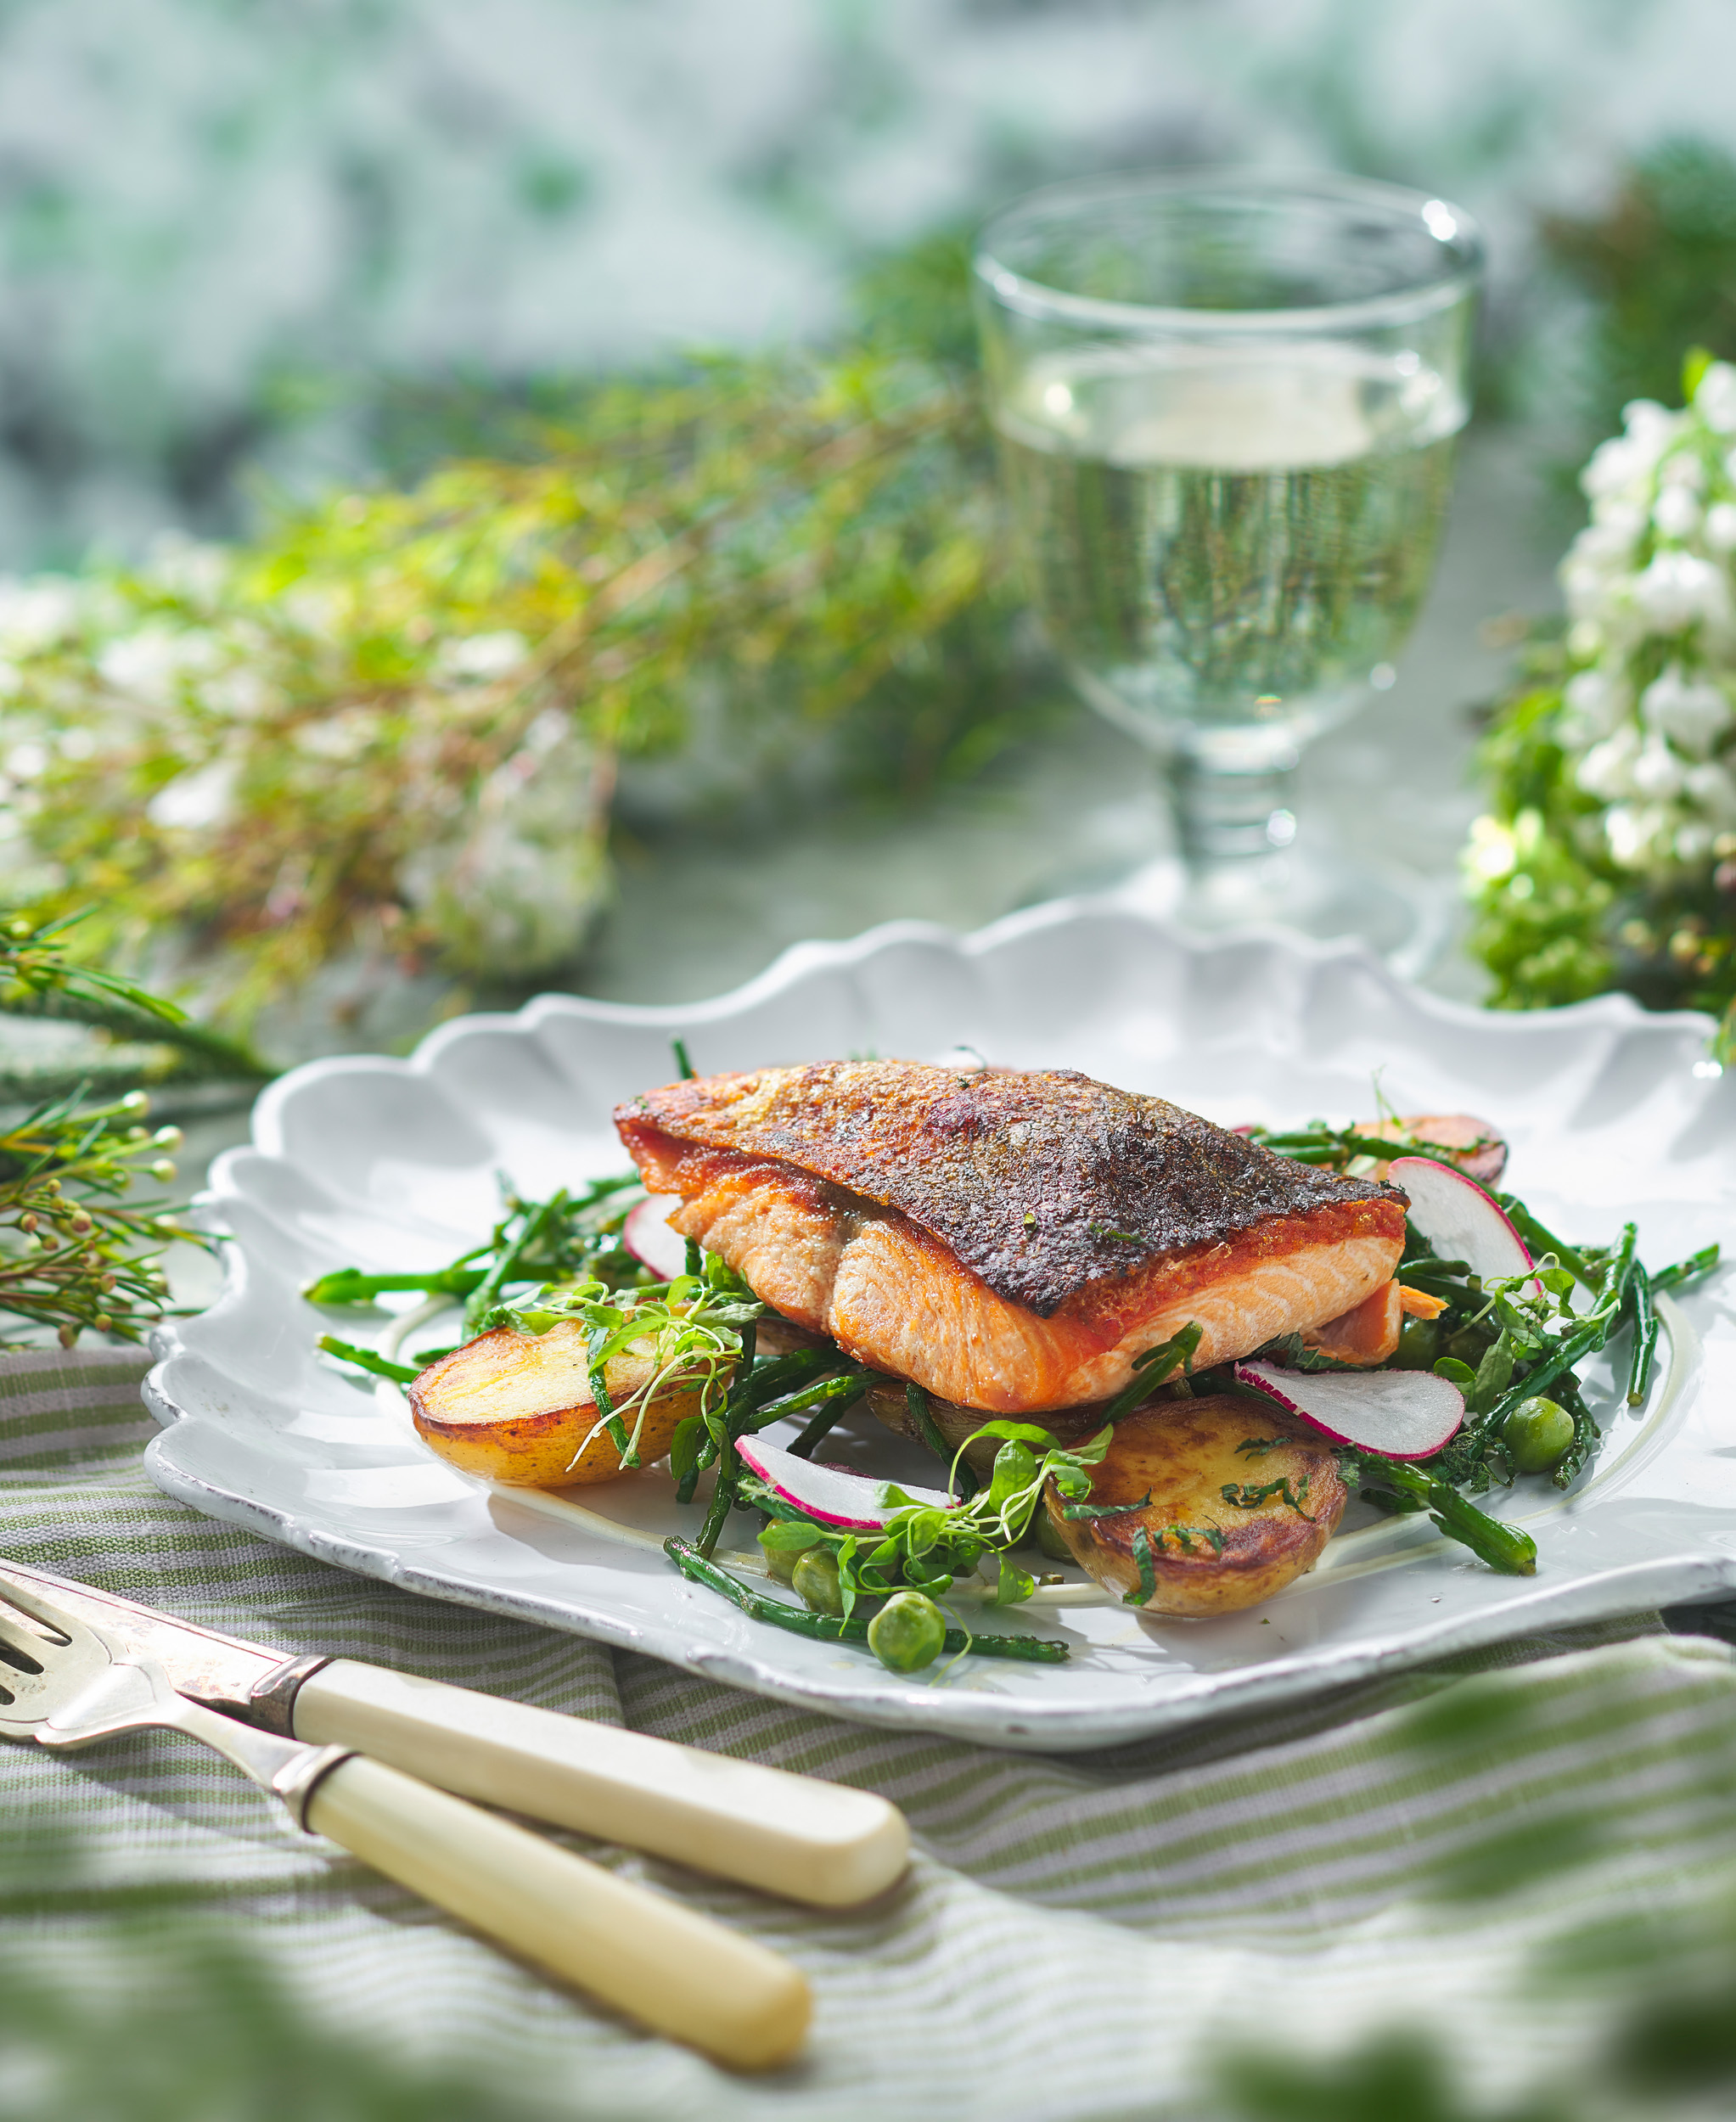 https://www.drakeandmorgan.co.uk/the-refinery-new-street-square/wp-content/uploads/2022/05/Seafood-Trout-3.jpg